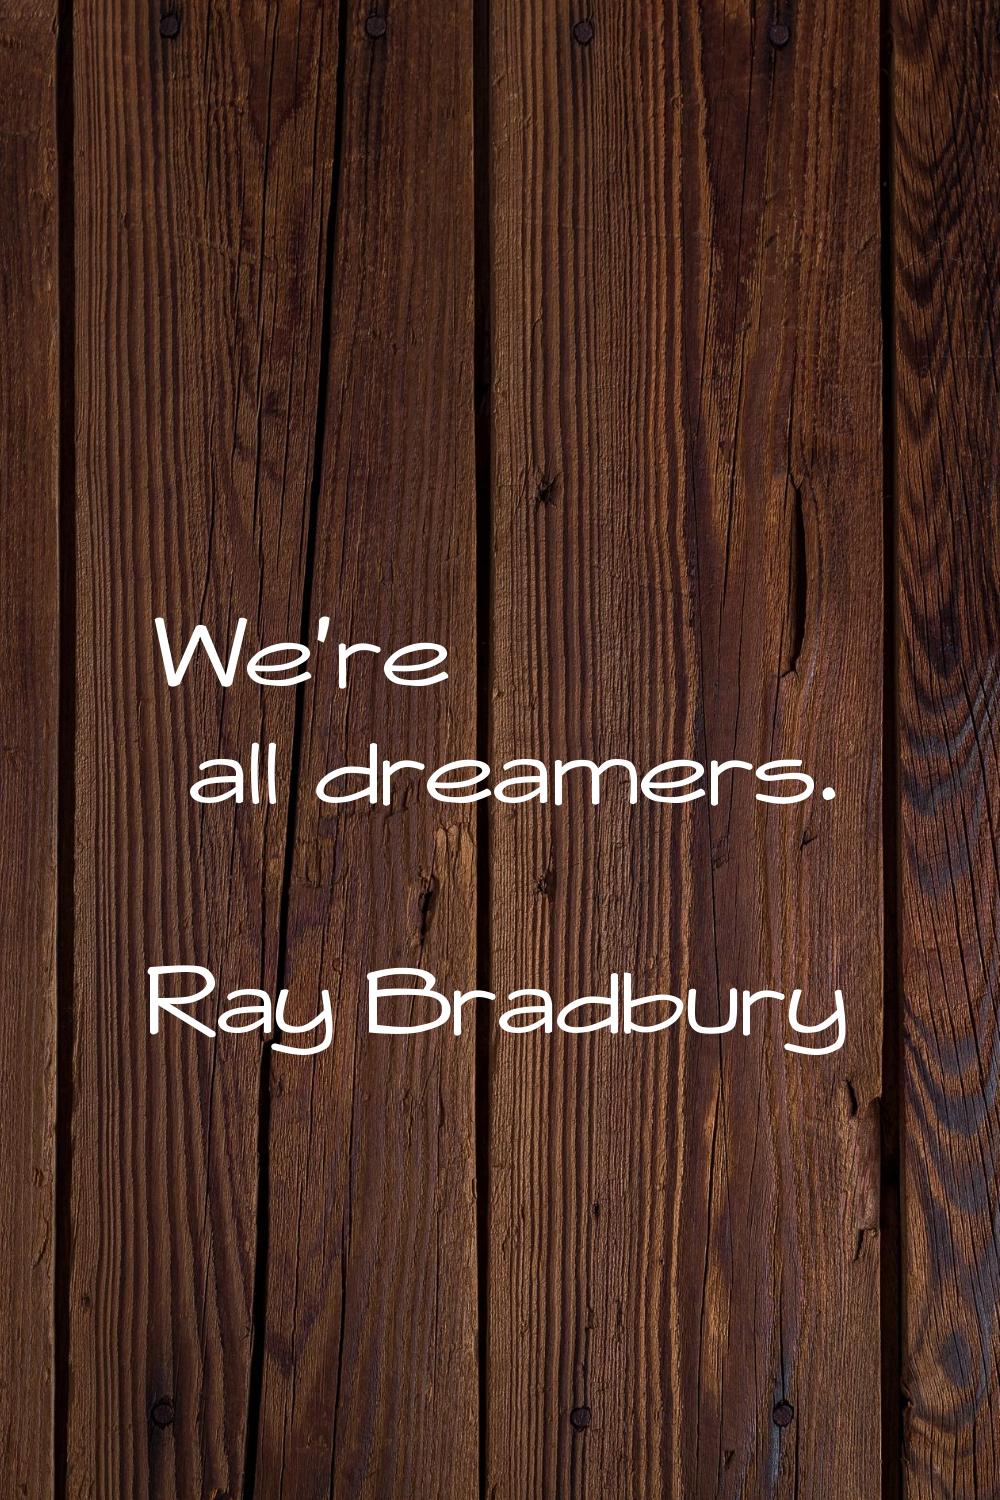 We're all dreamers.